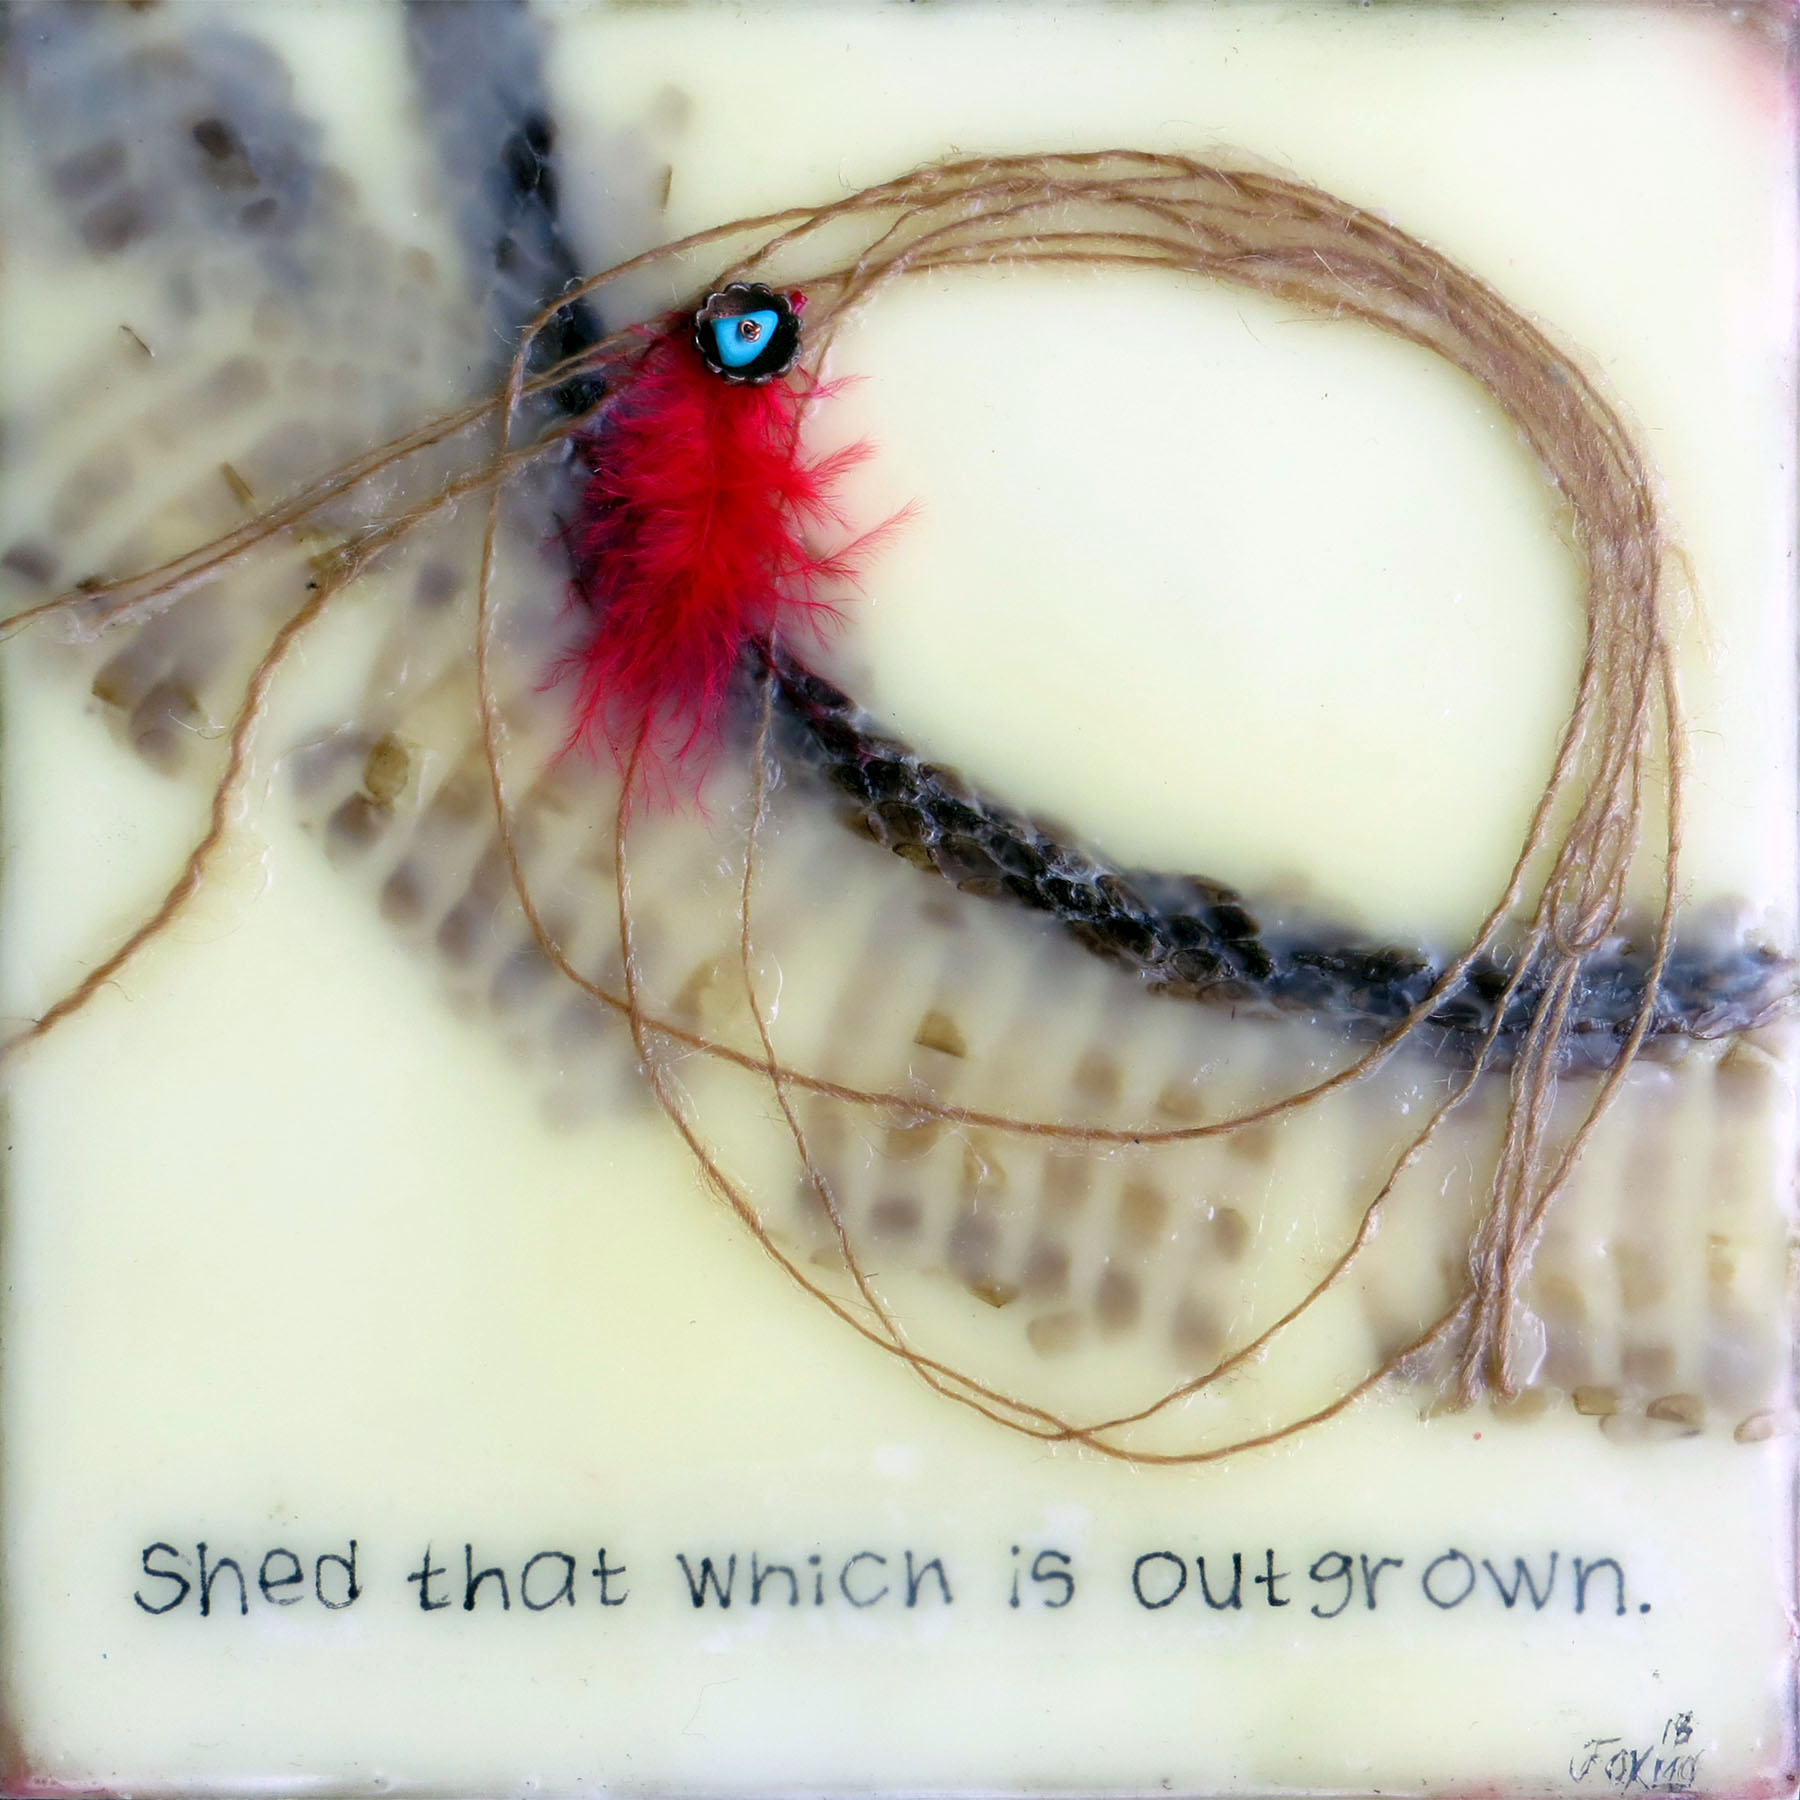 Image of an encaustic painting by Janet Fox including shedded snake skin, twine, red feather, copper bead and turquoise bead with the words "Shed that which is